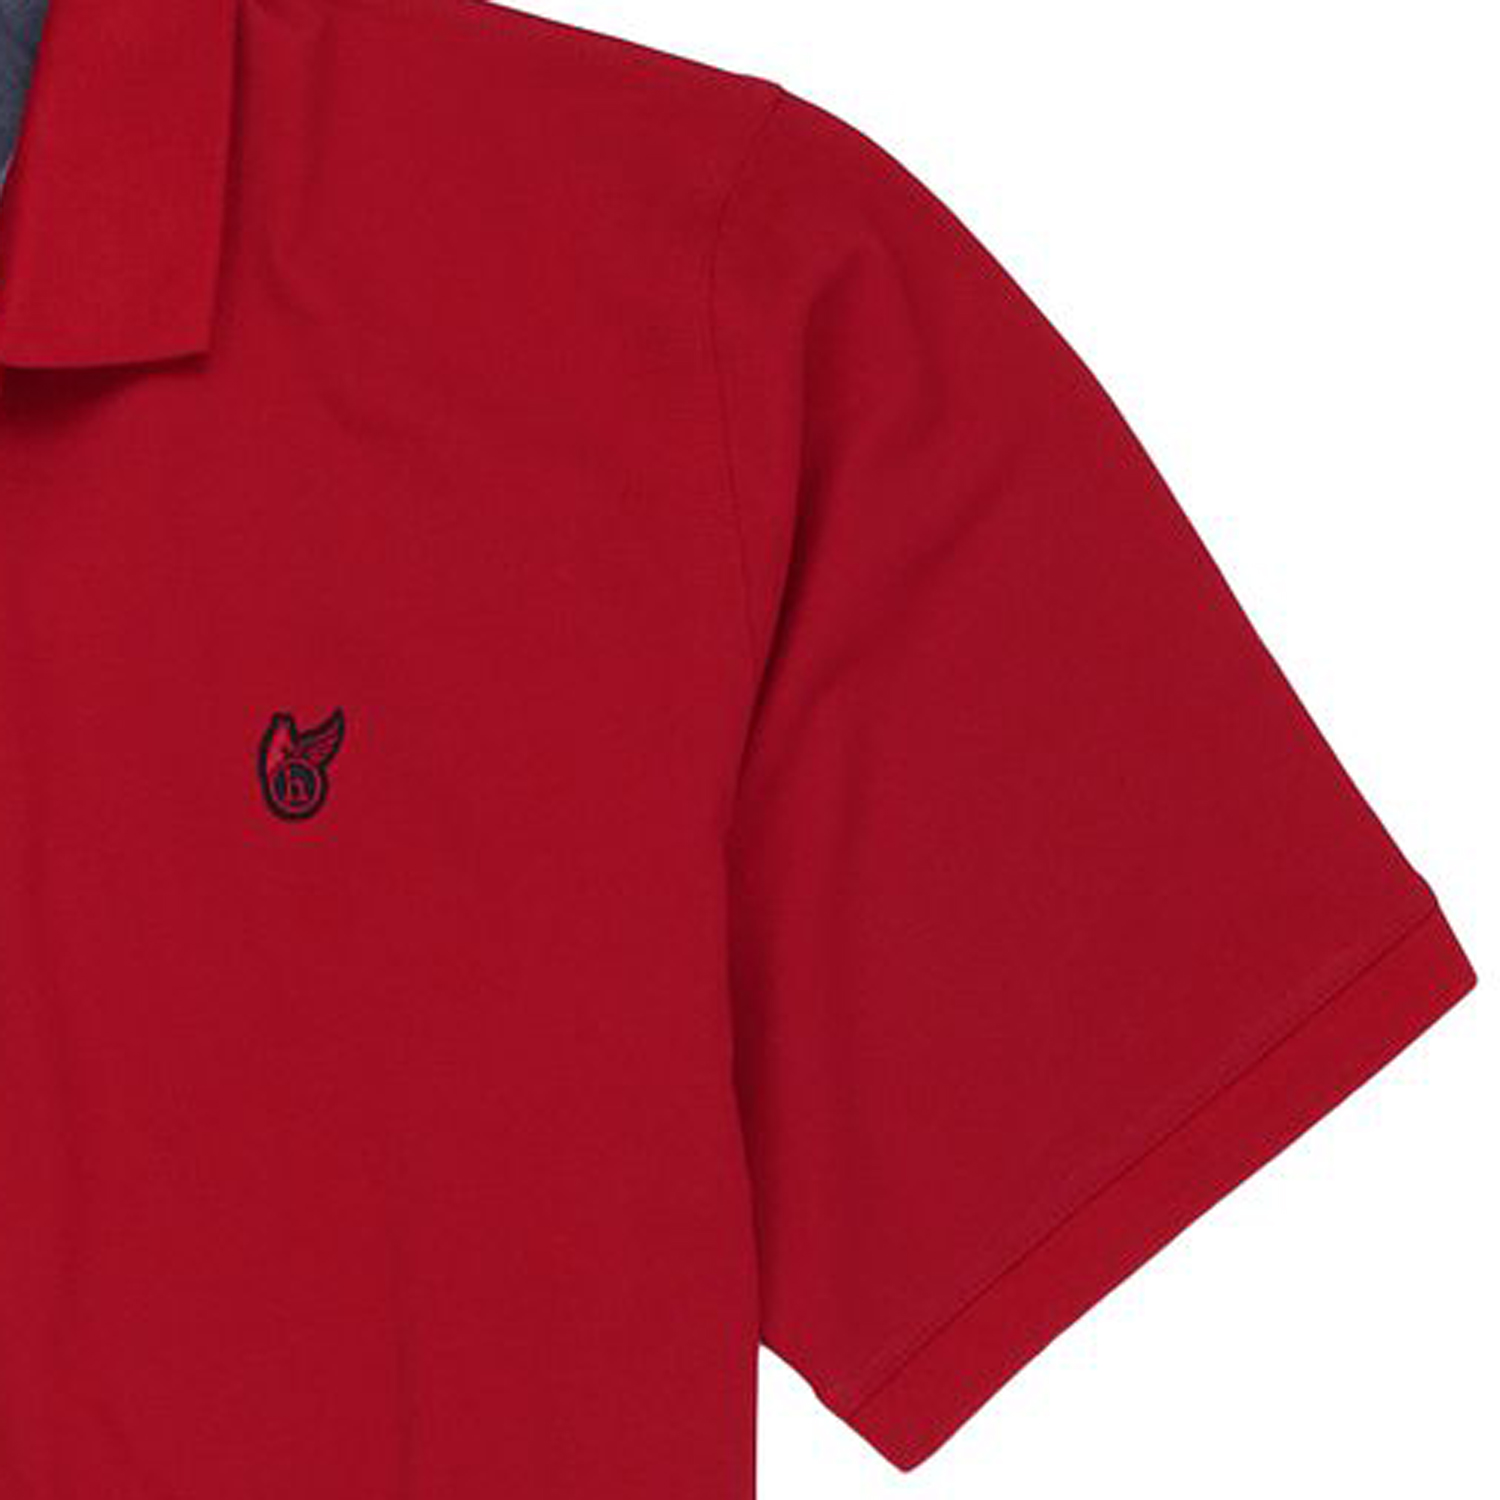 Polo shirt "stay fresh" by hajo in red up to oversize 6XL